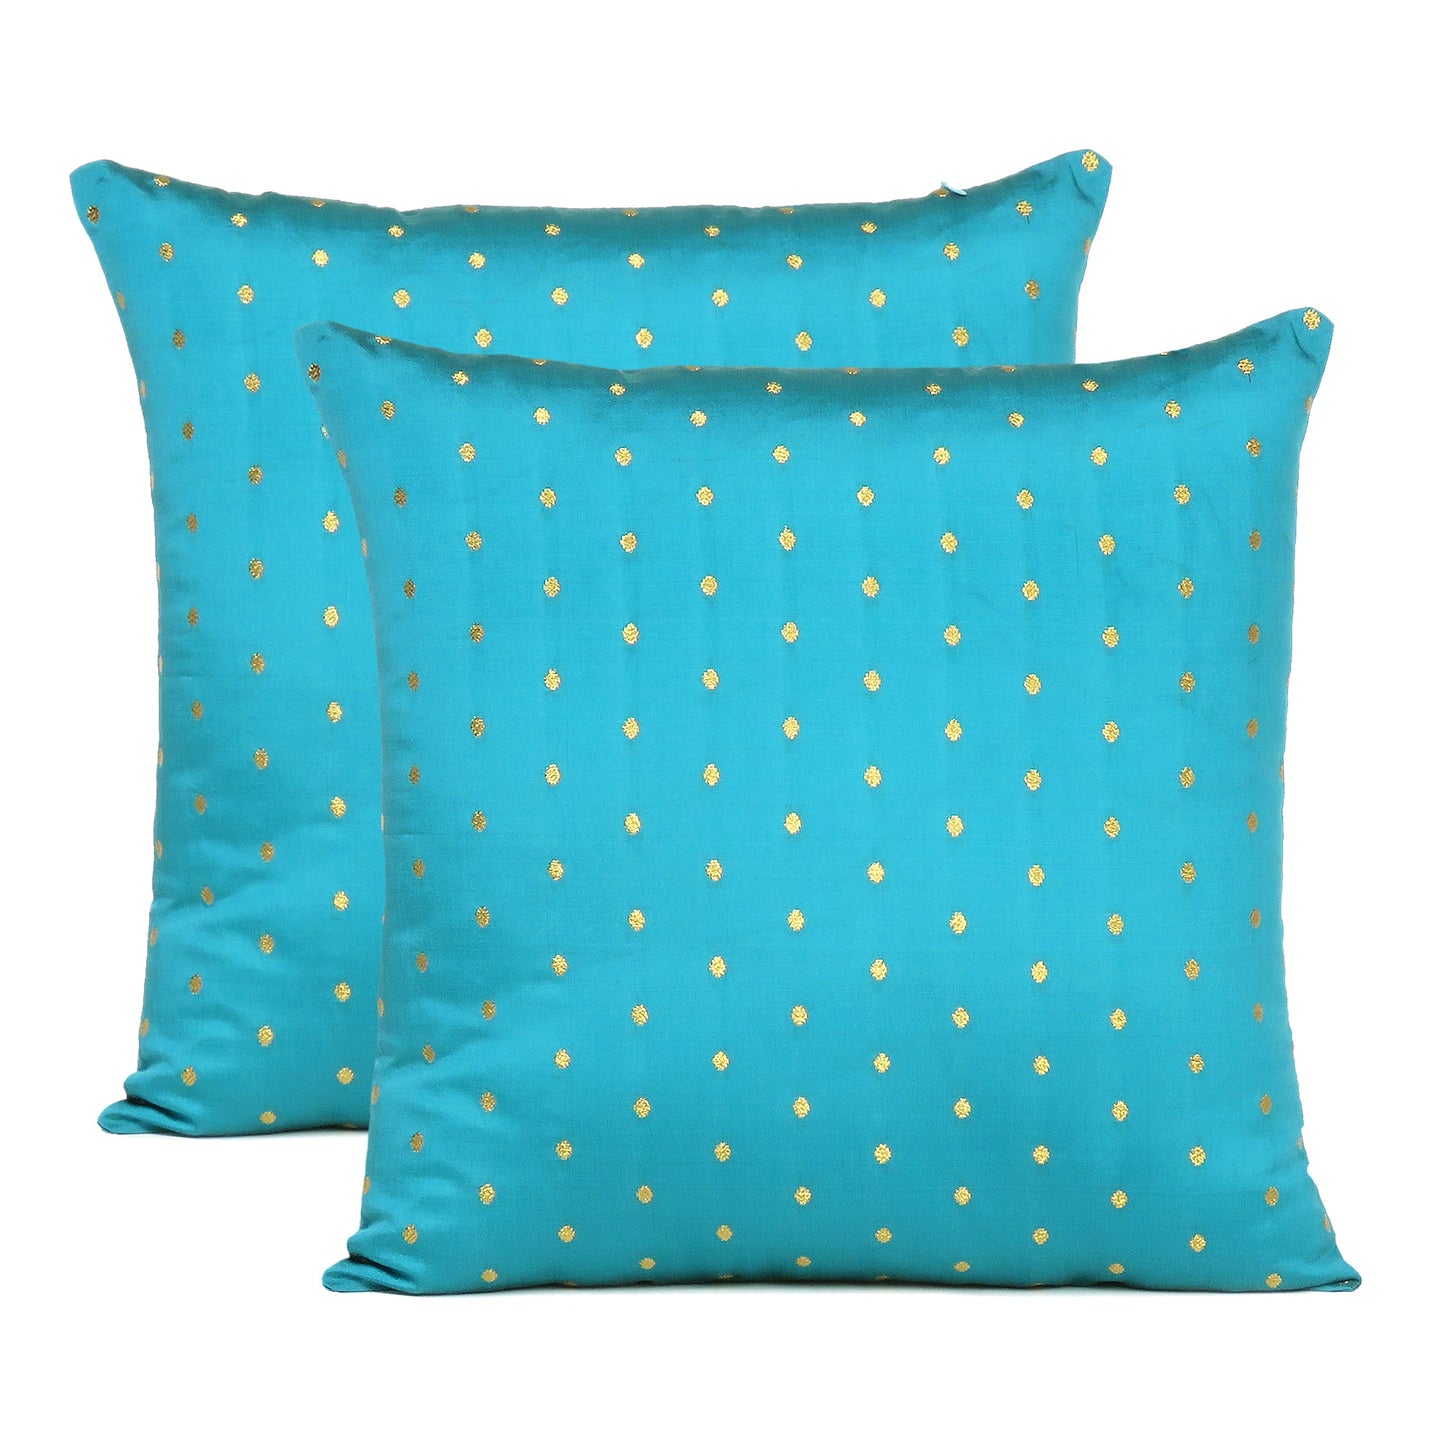 Art Silk Peacock Blue Cushion Cover in Set of 2